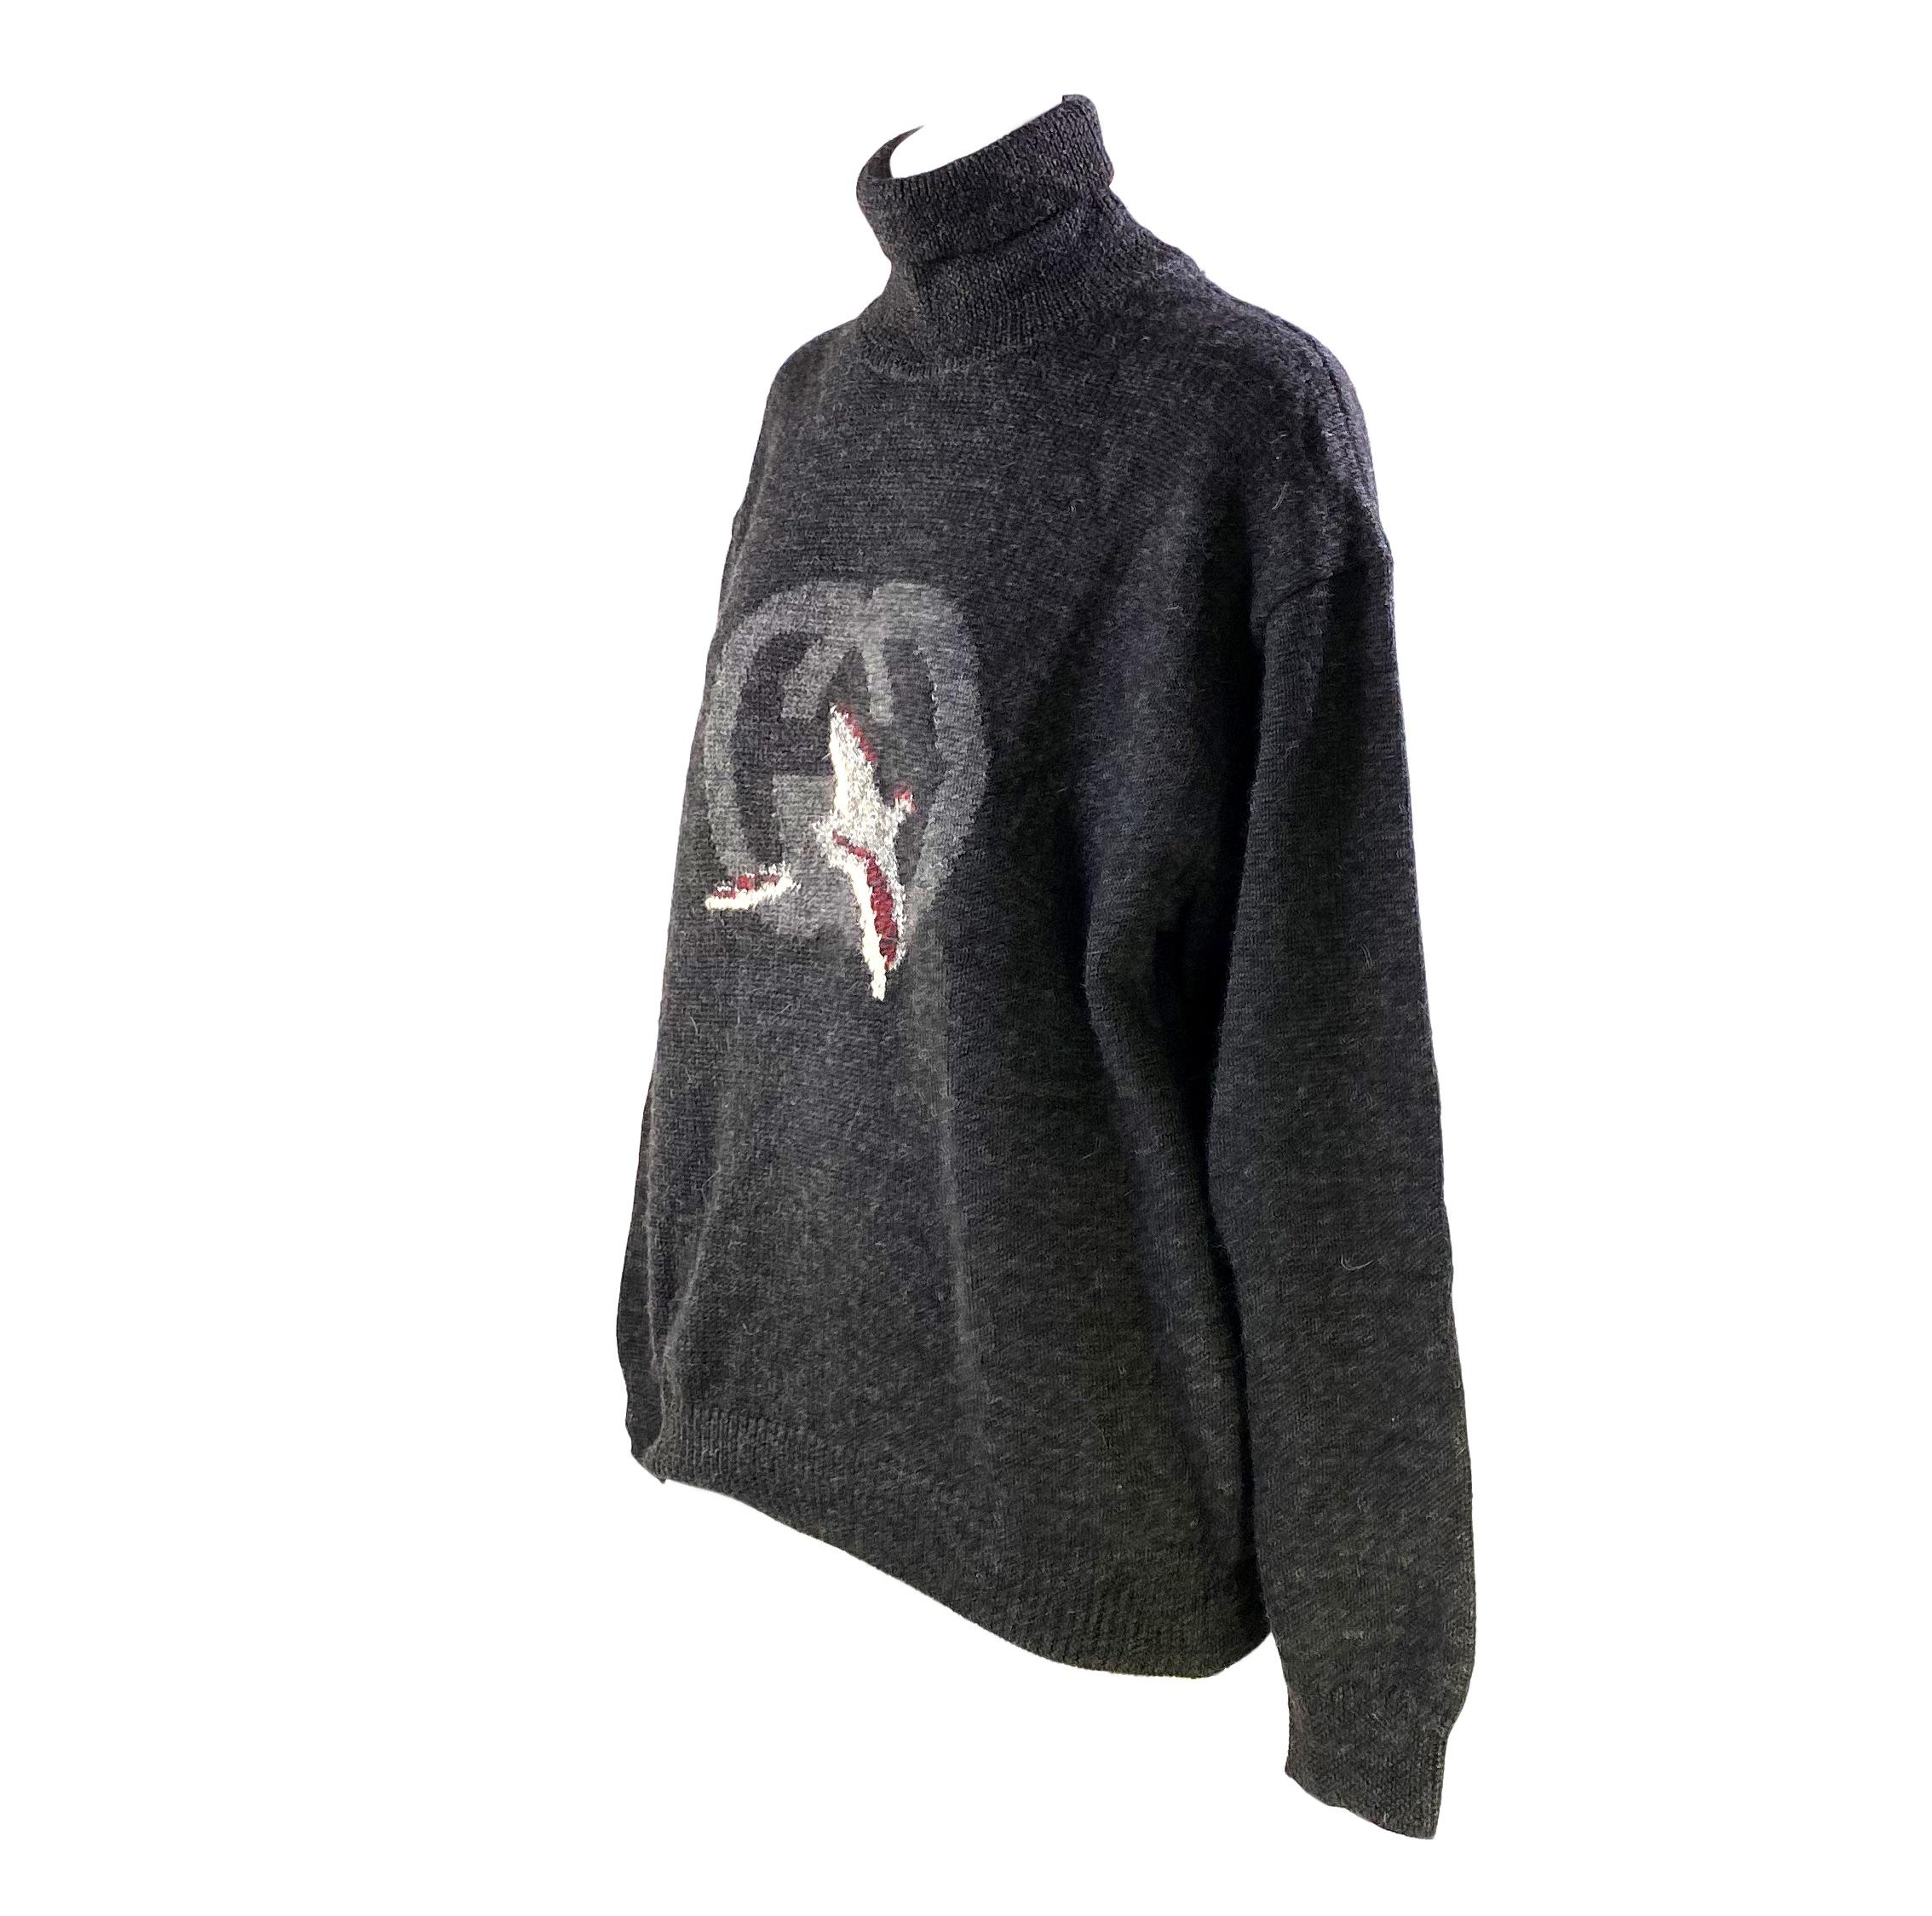 Presenting a rare oversized 'GG' logo wool and alpaca pullover turtleneck sweater designed by Gucci in the 1980s for their menswear line. The tonal logo is accented with an image of a pheasant-like bird as an homage to Gucci's sportswear DNA. This